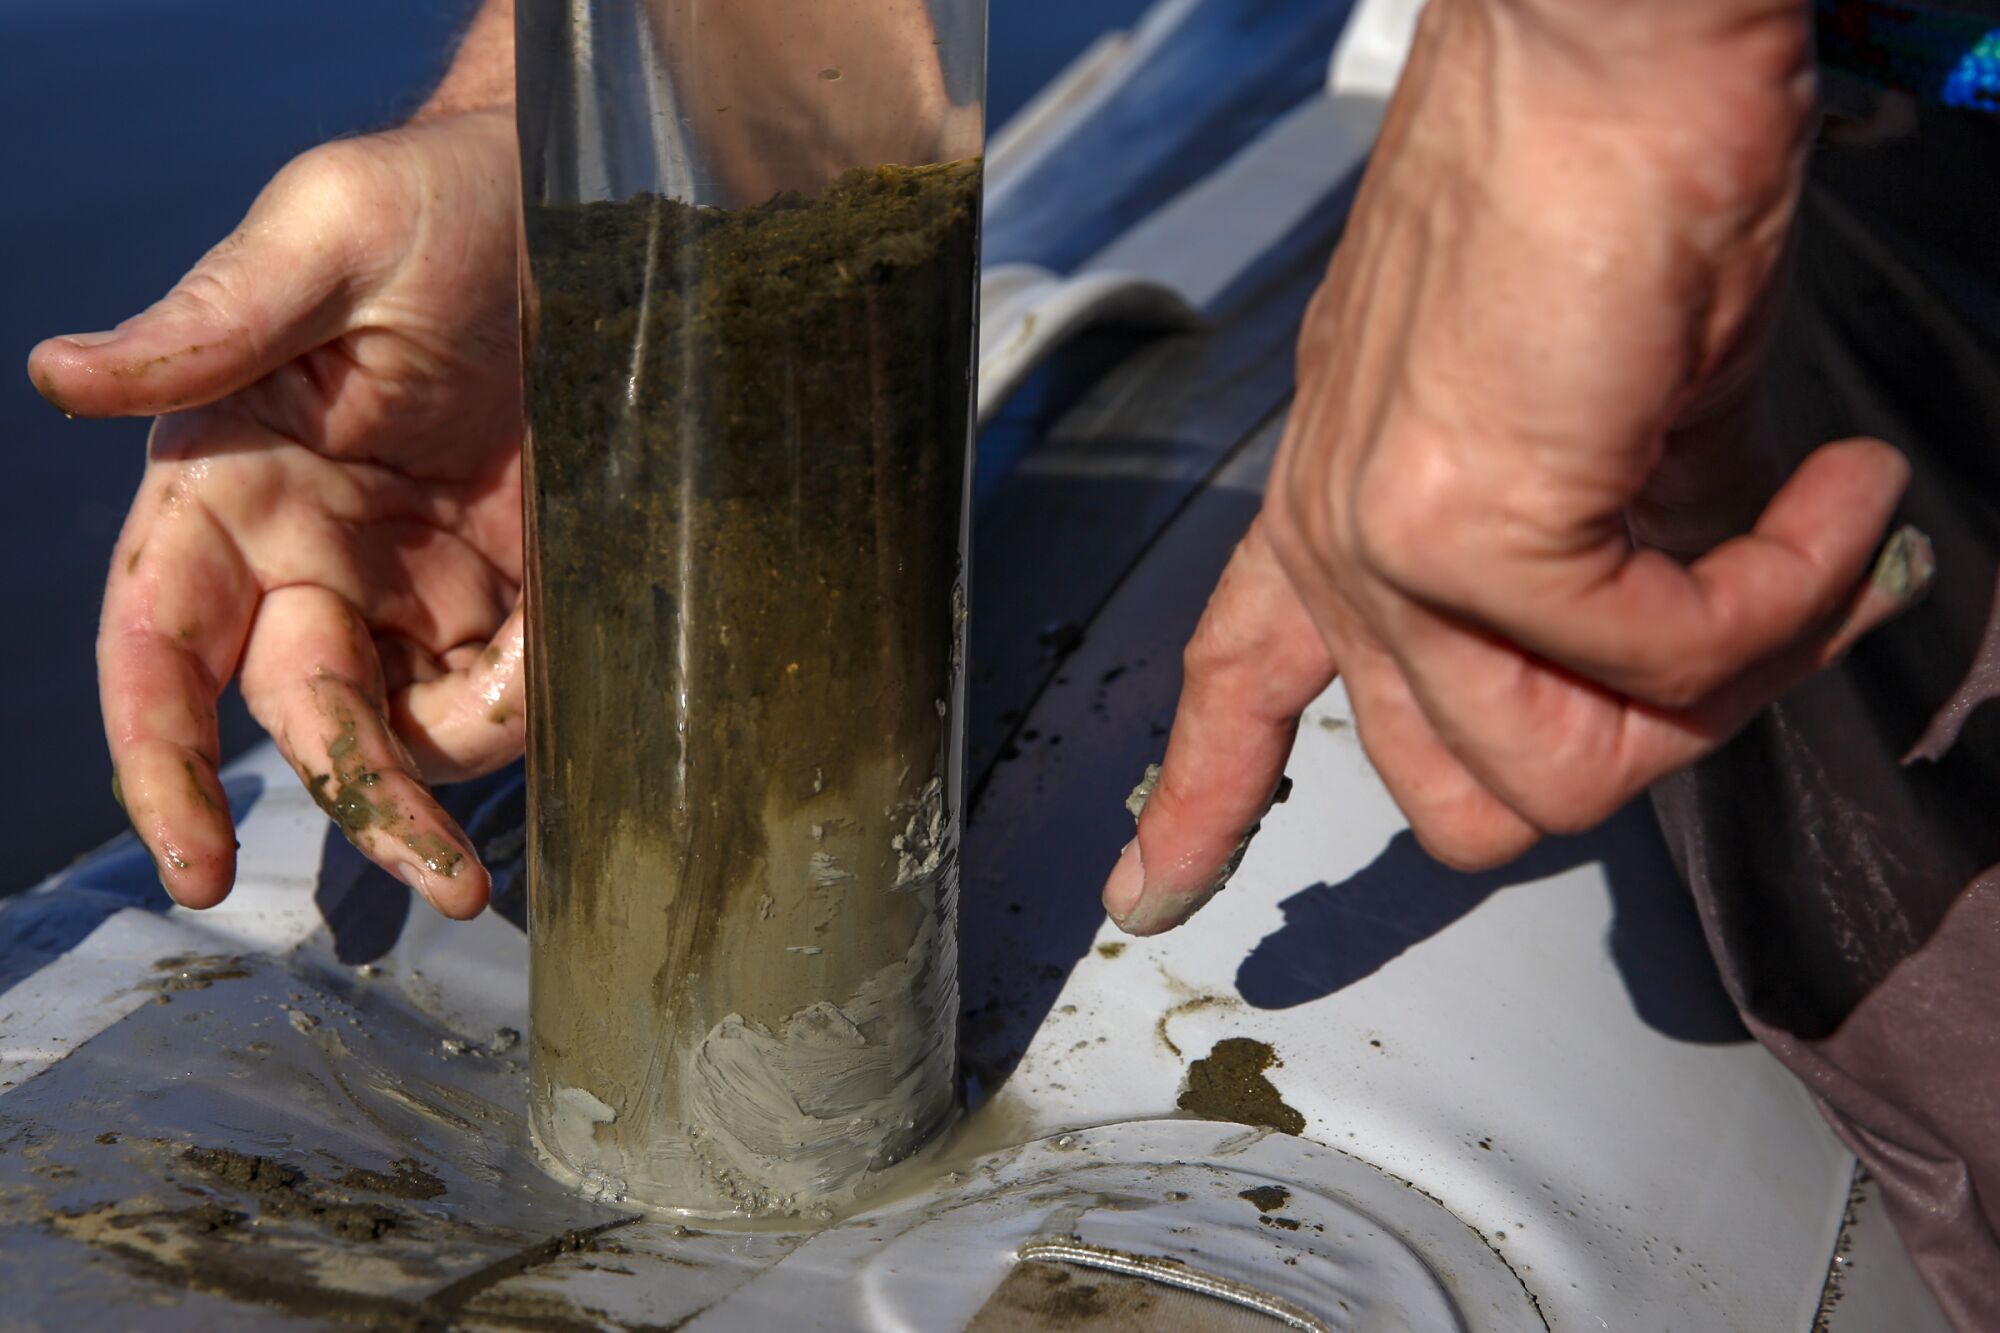 A person's hands point to a tube of mud and sediment.